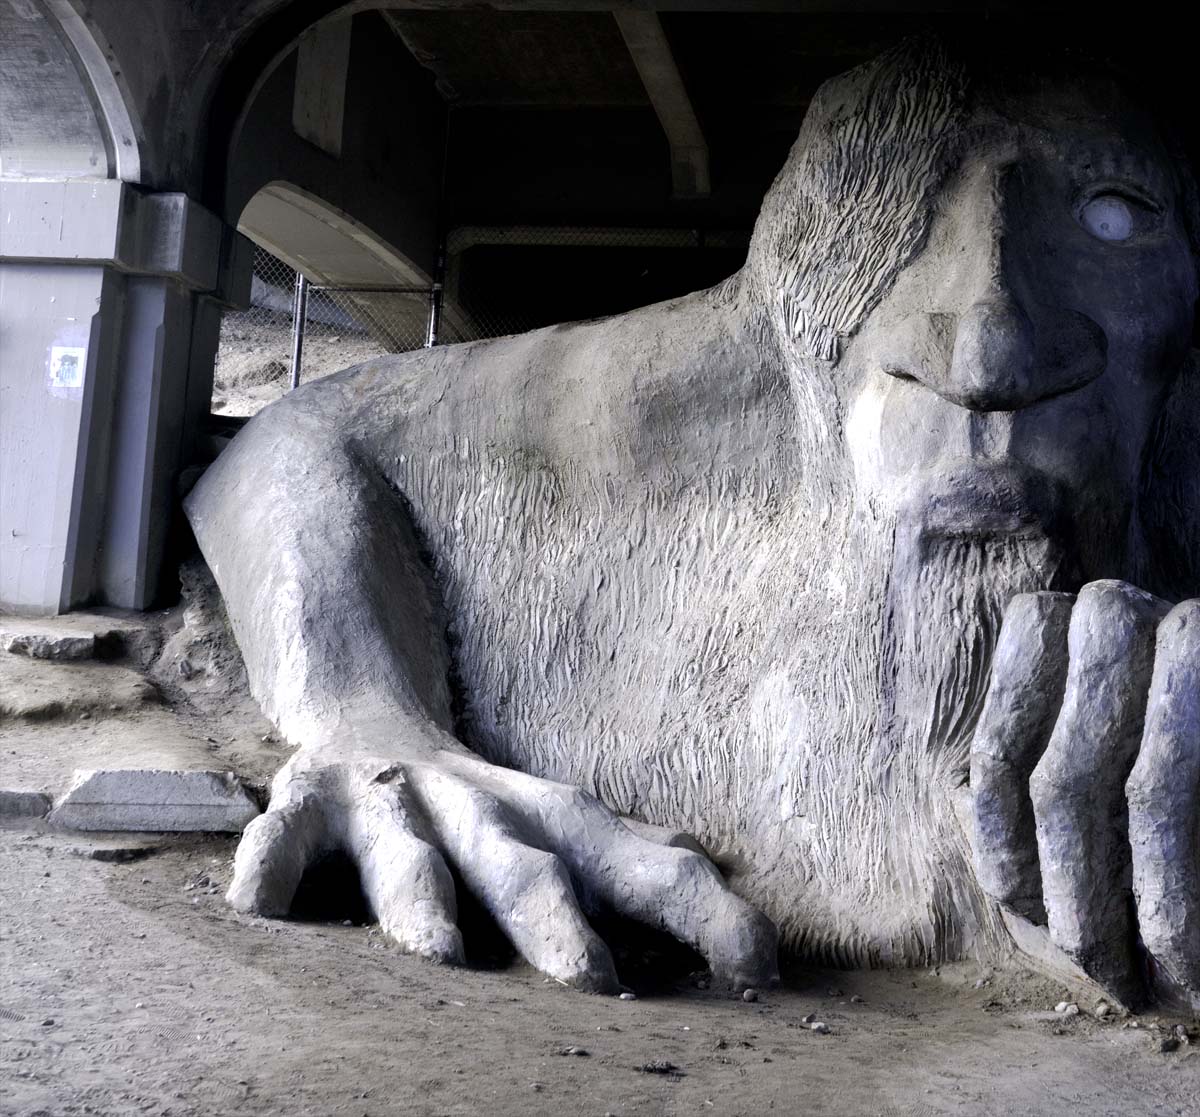 Fremont Troll sculpture, one of the unique things to do in Seattle